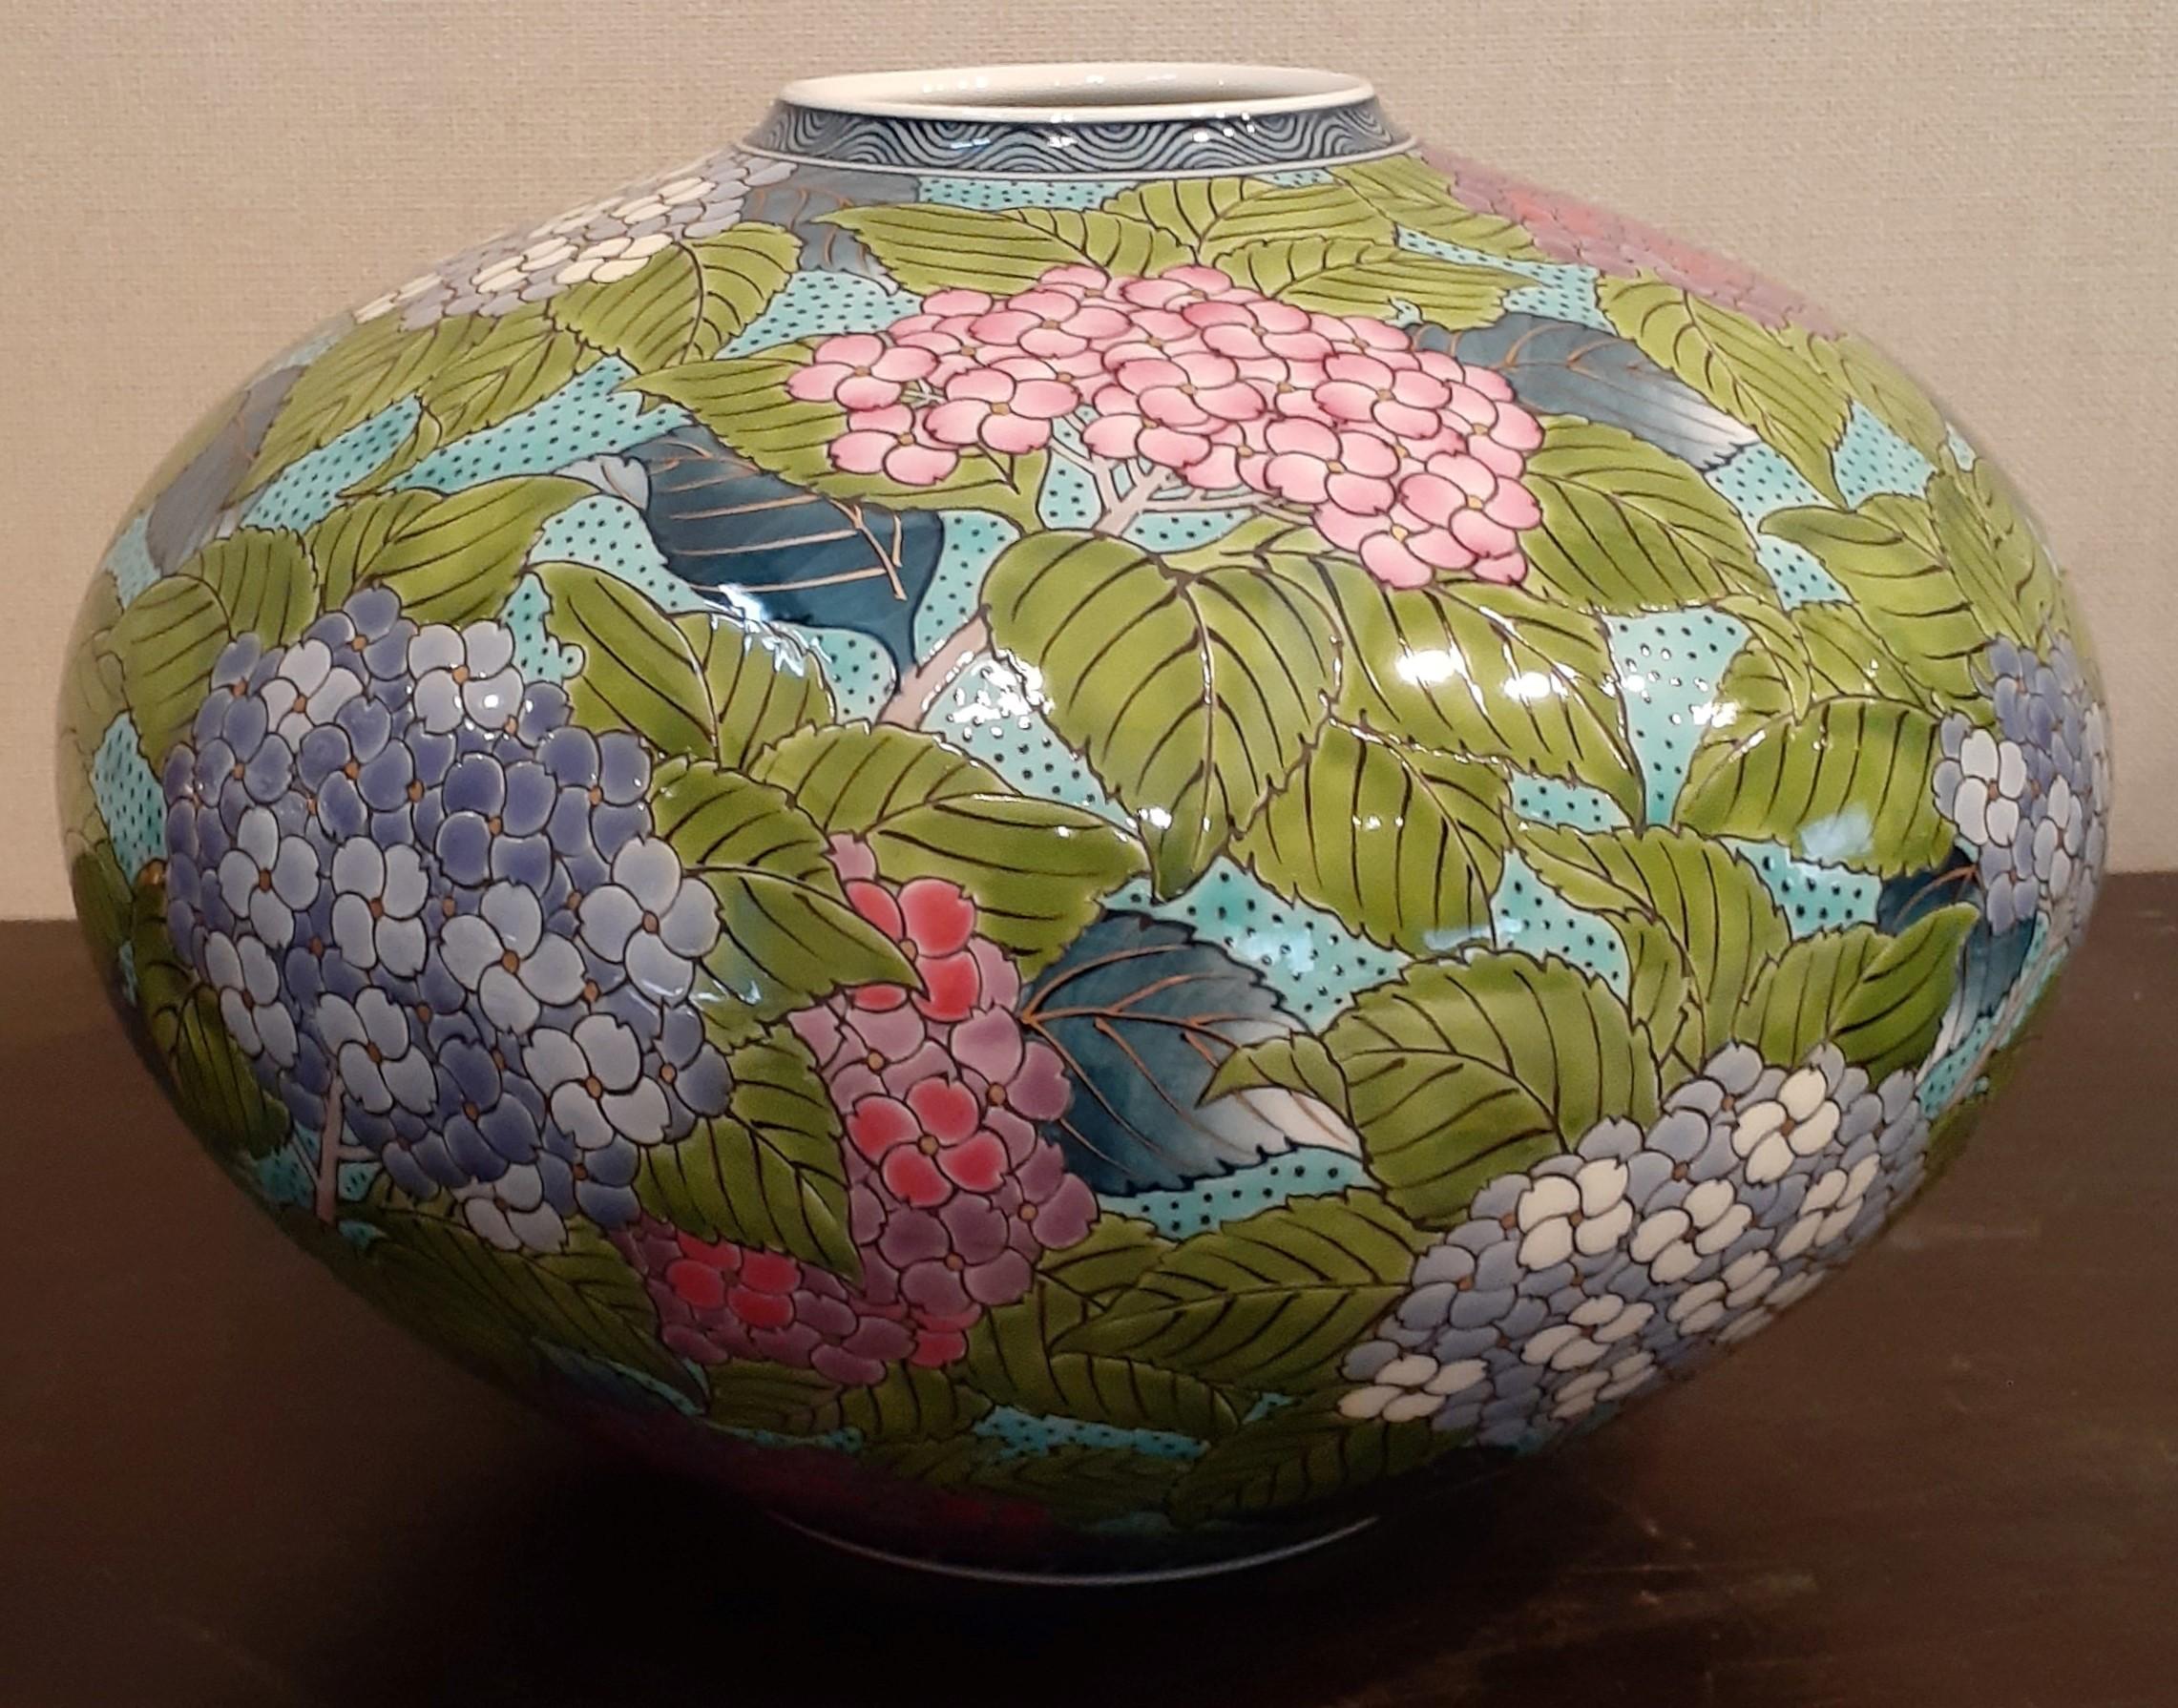 Mesmerizing contemporary Japanese porcelain vase, intricately hand painted showcasing hydrangeas in vibrant red, pink, blue on a beautifully shaped porcelain body in a stunning turquoise blue. It is a signed masterpiece by highly acclaimed